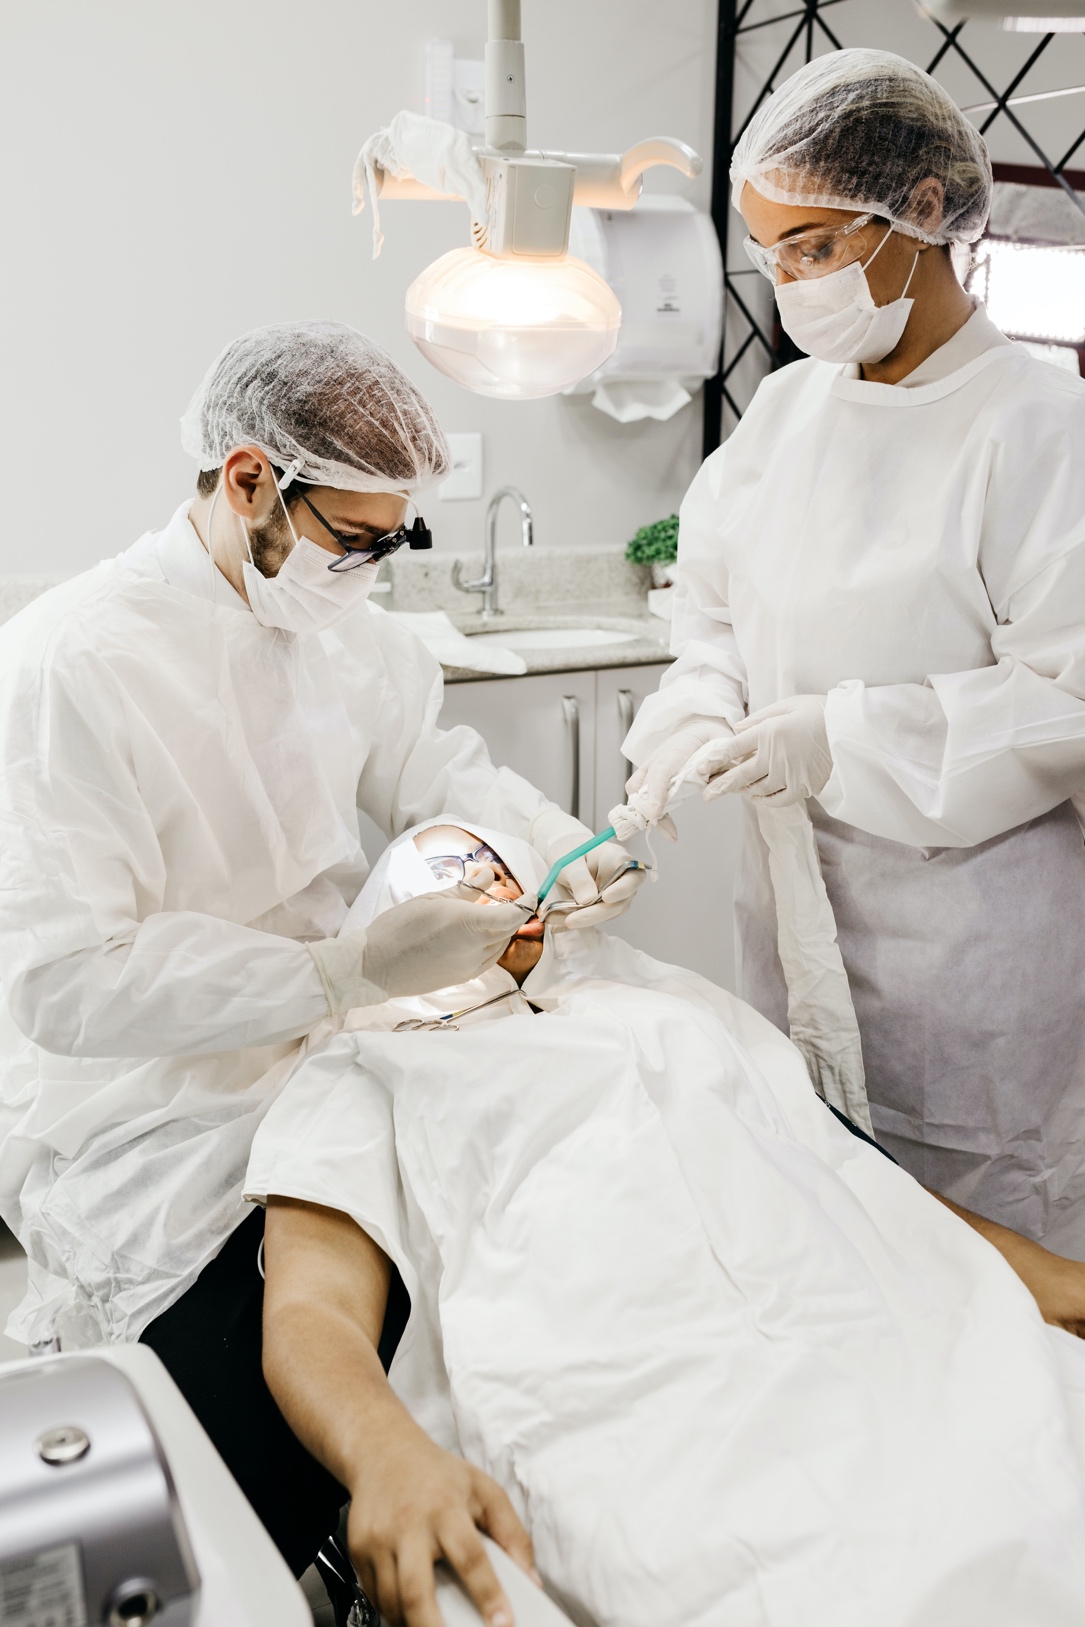 A dentist performing a dental procedure on a patient